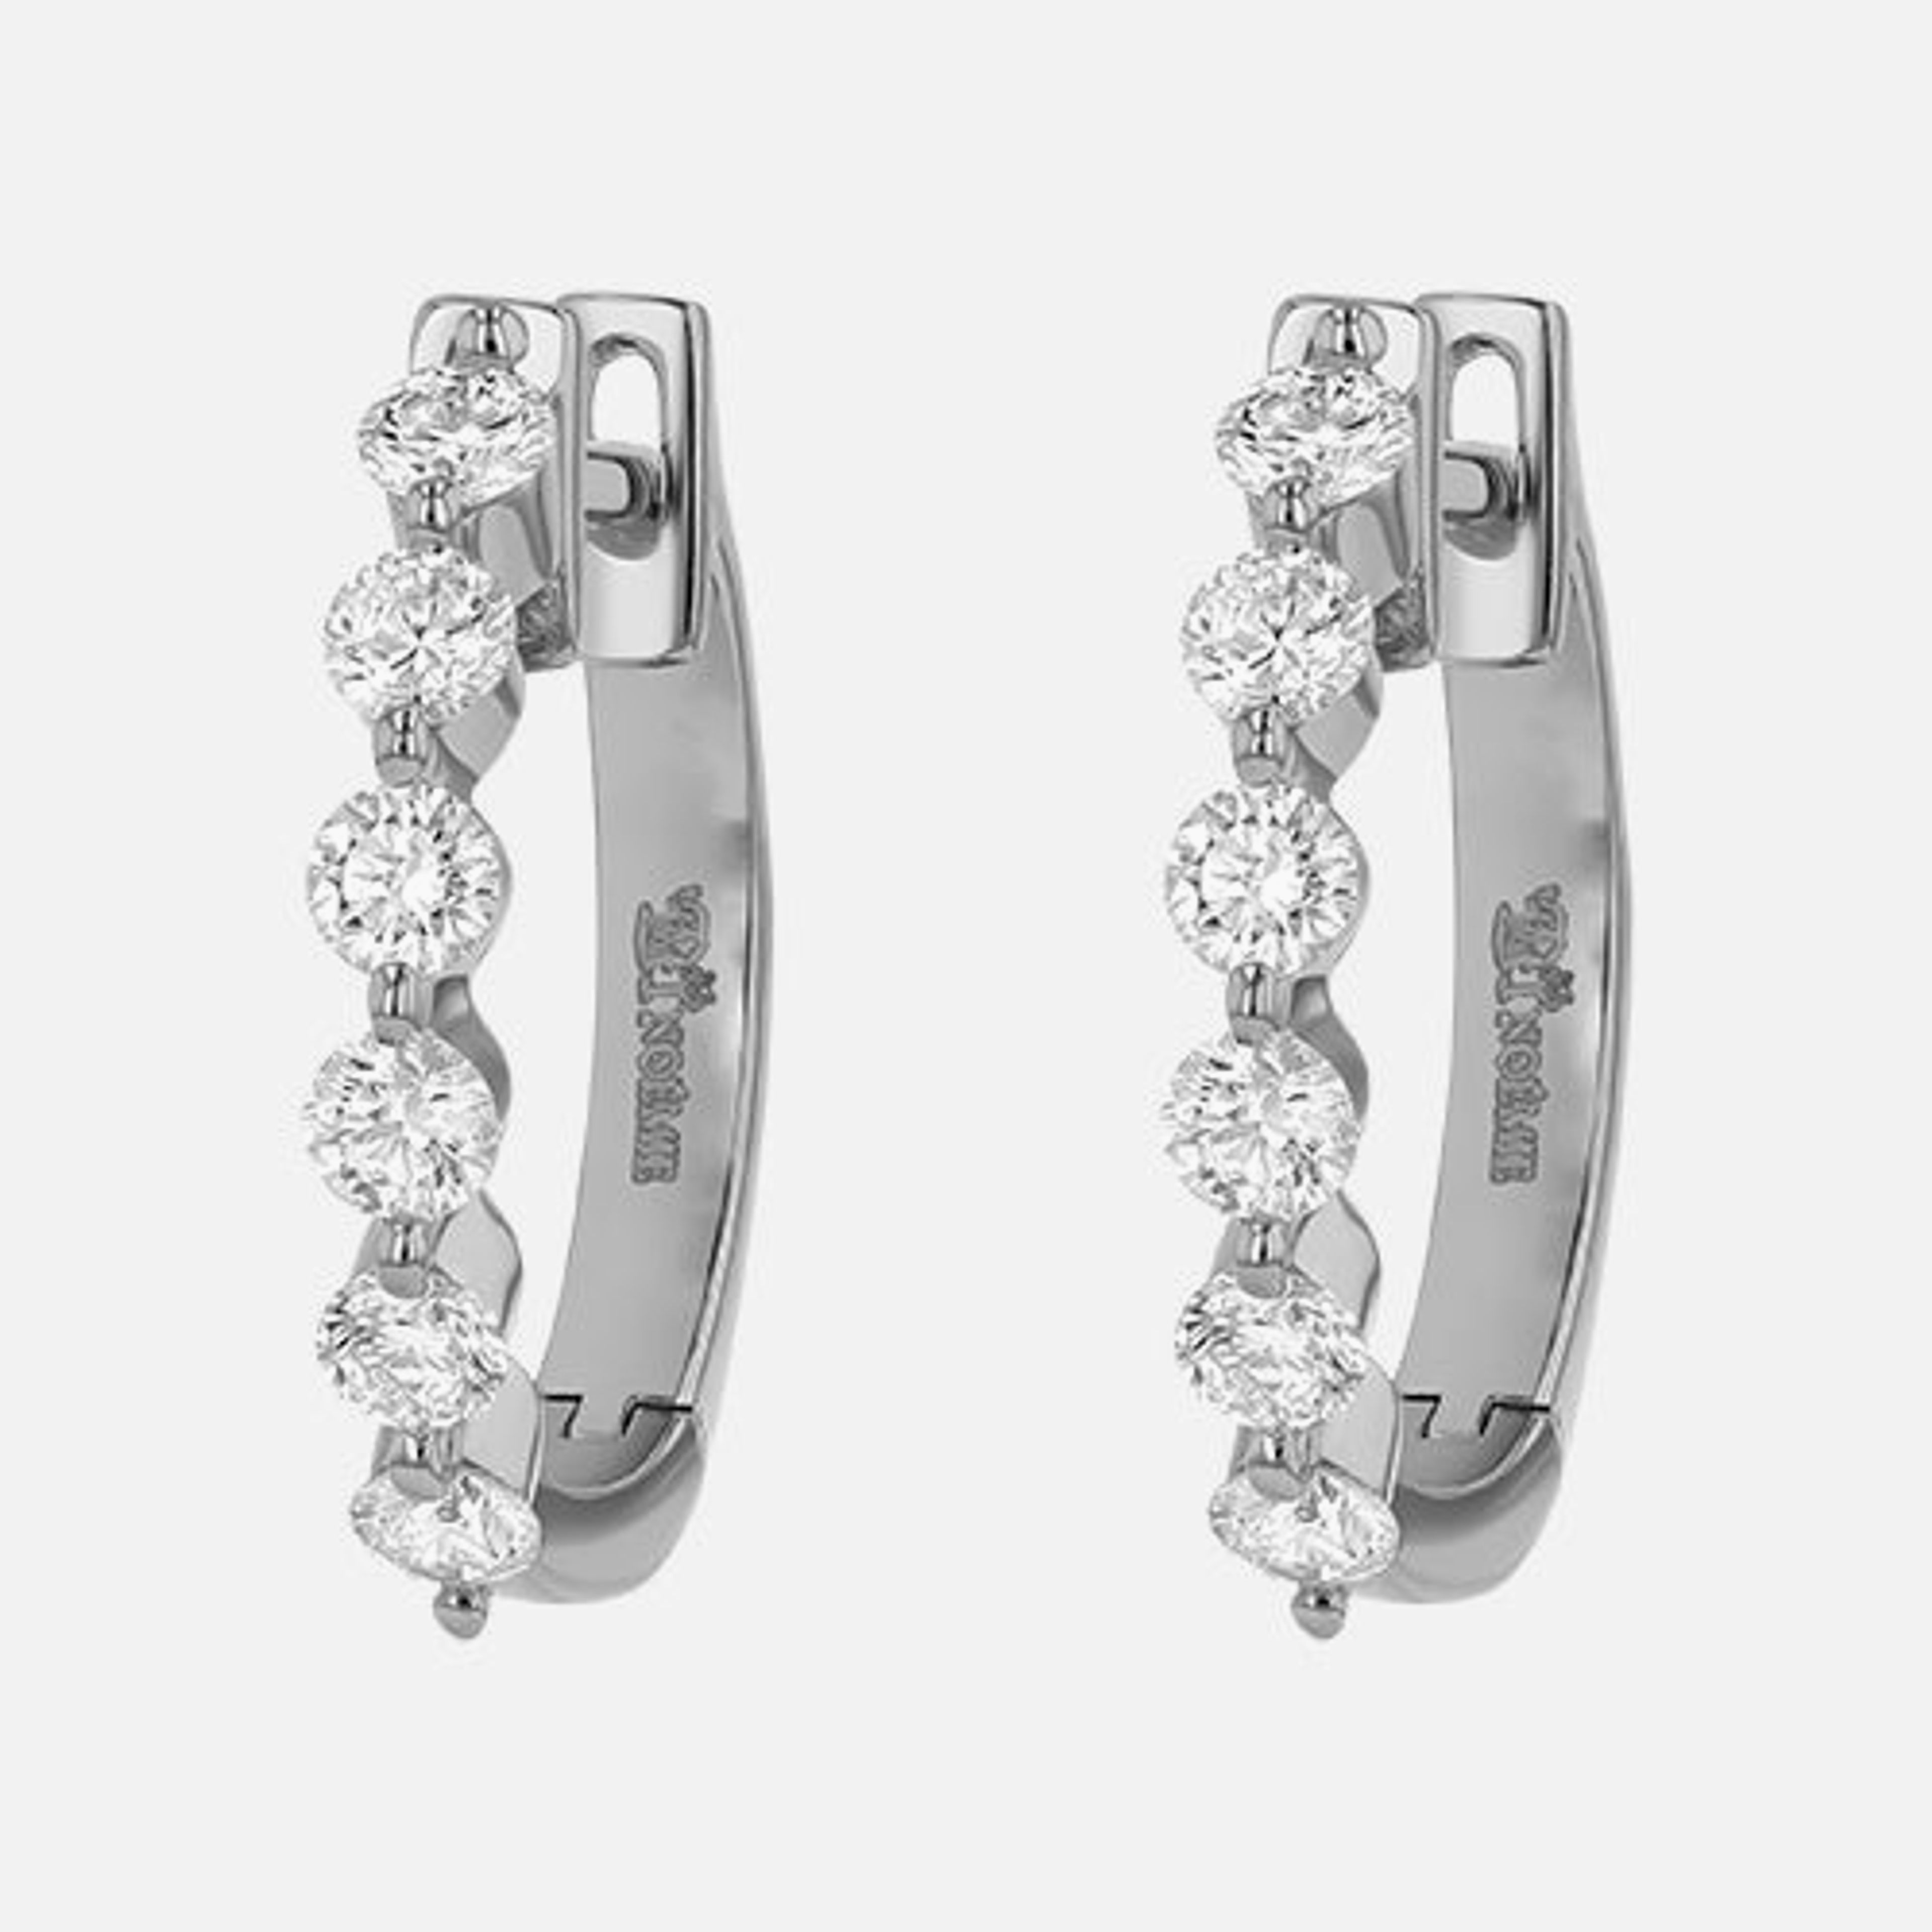 The Multiple Diamond Hoops with 0.5 Carats